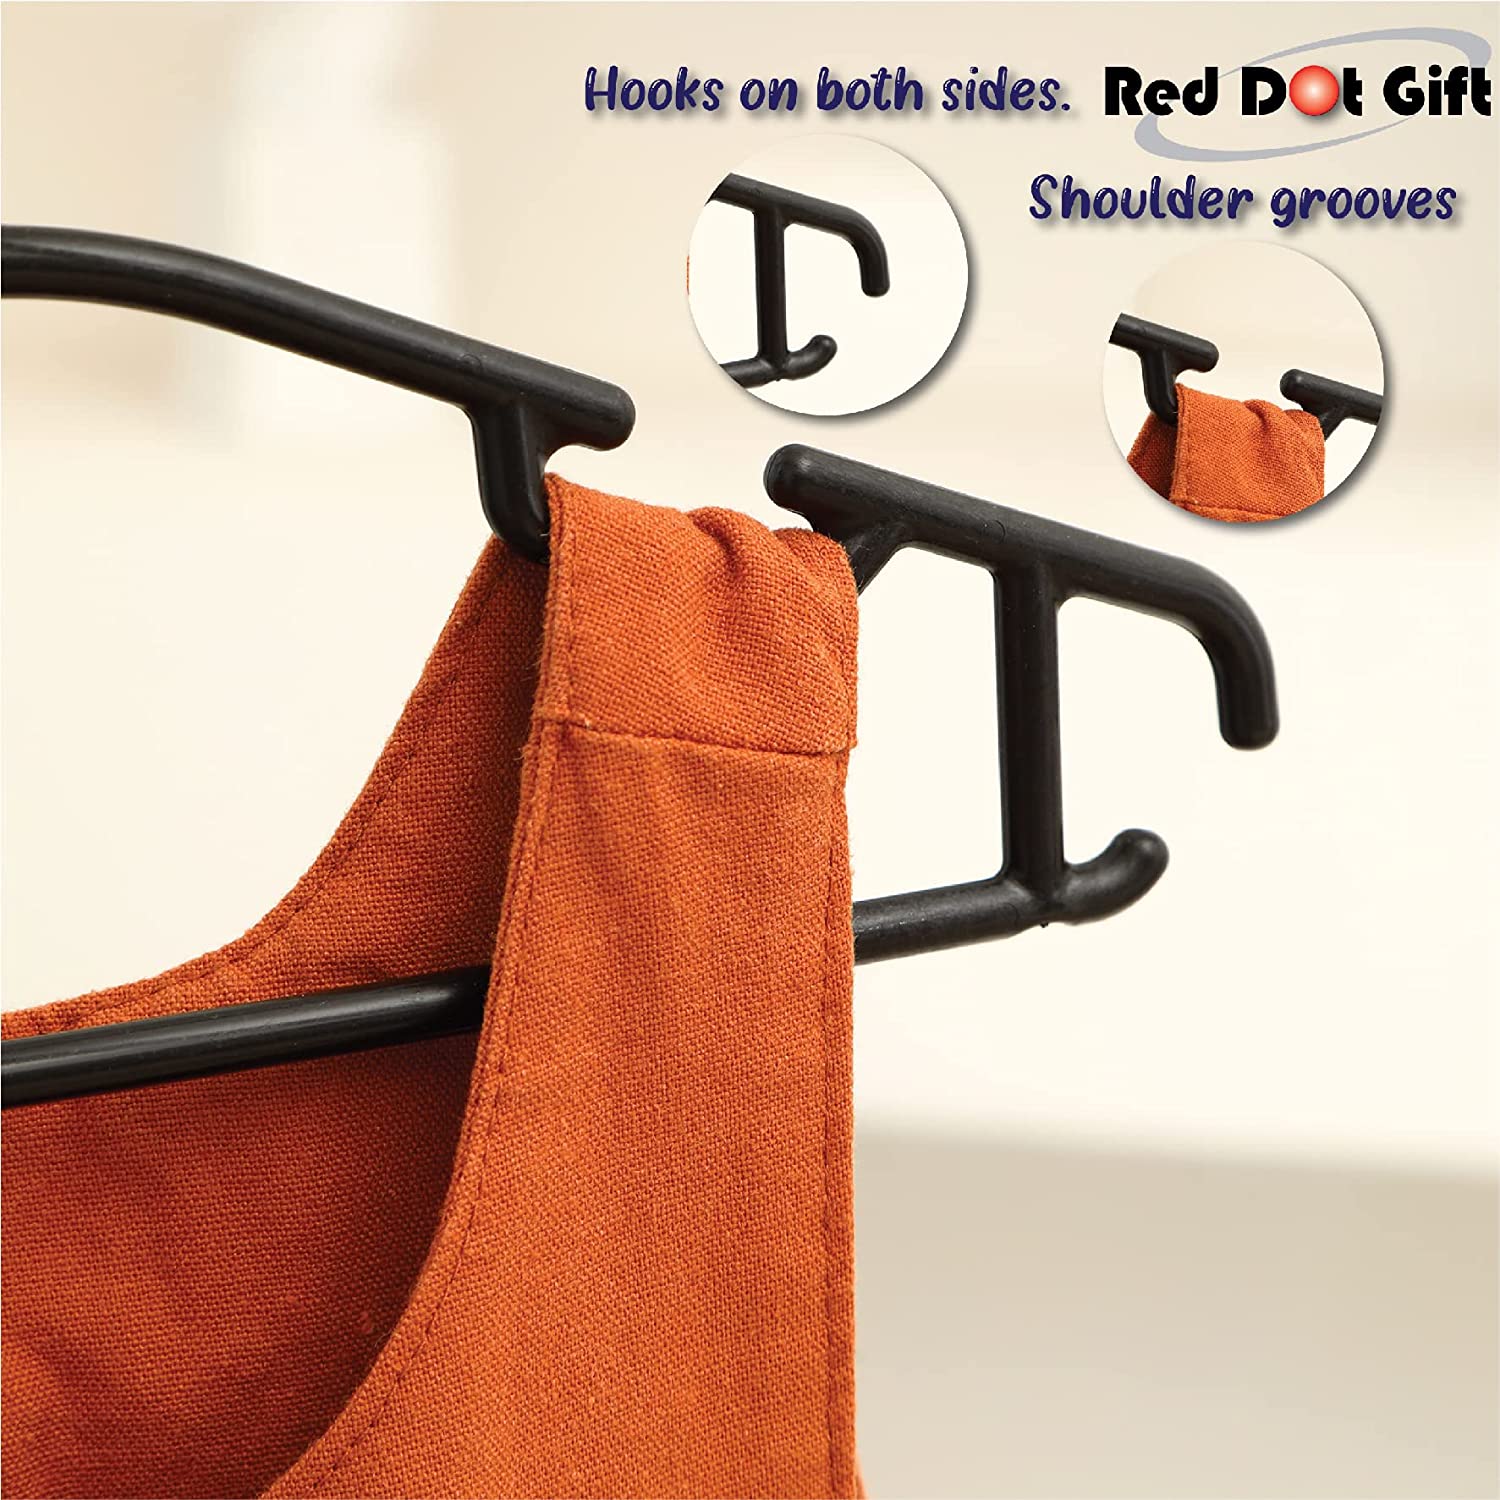 Plastic Clothes Hangers 8pk - Red Dot